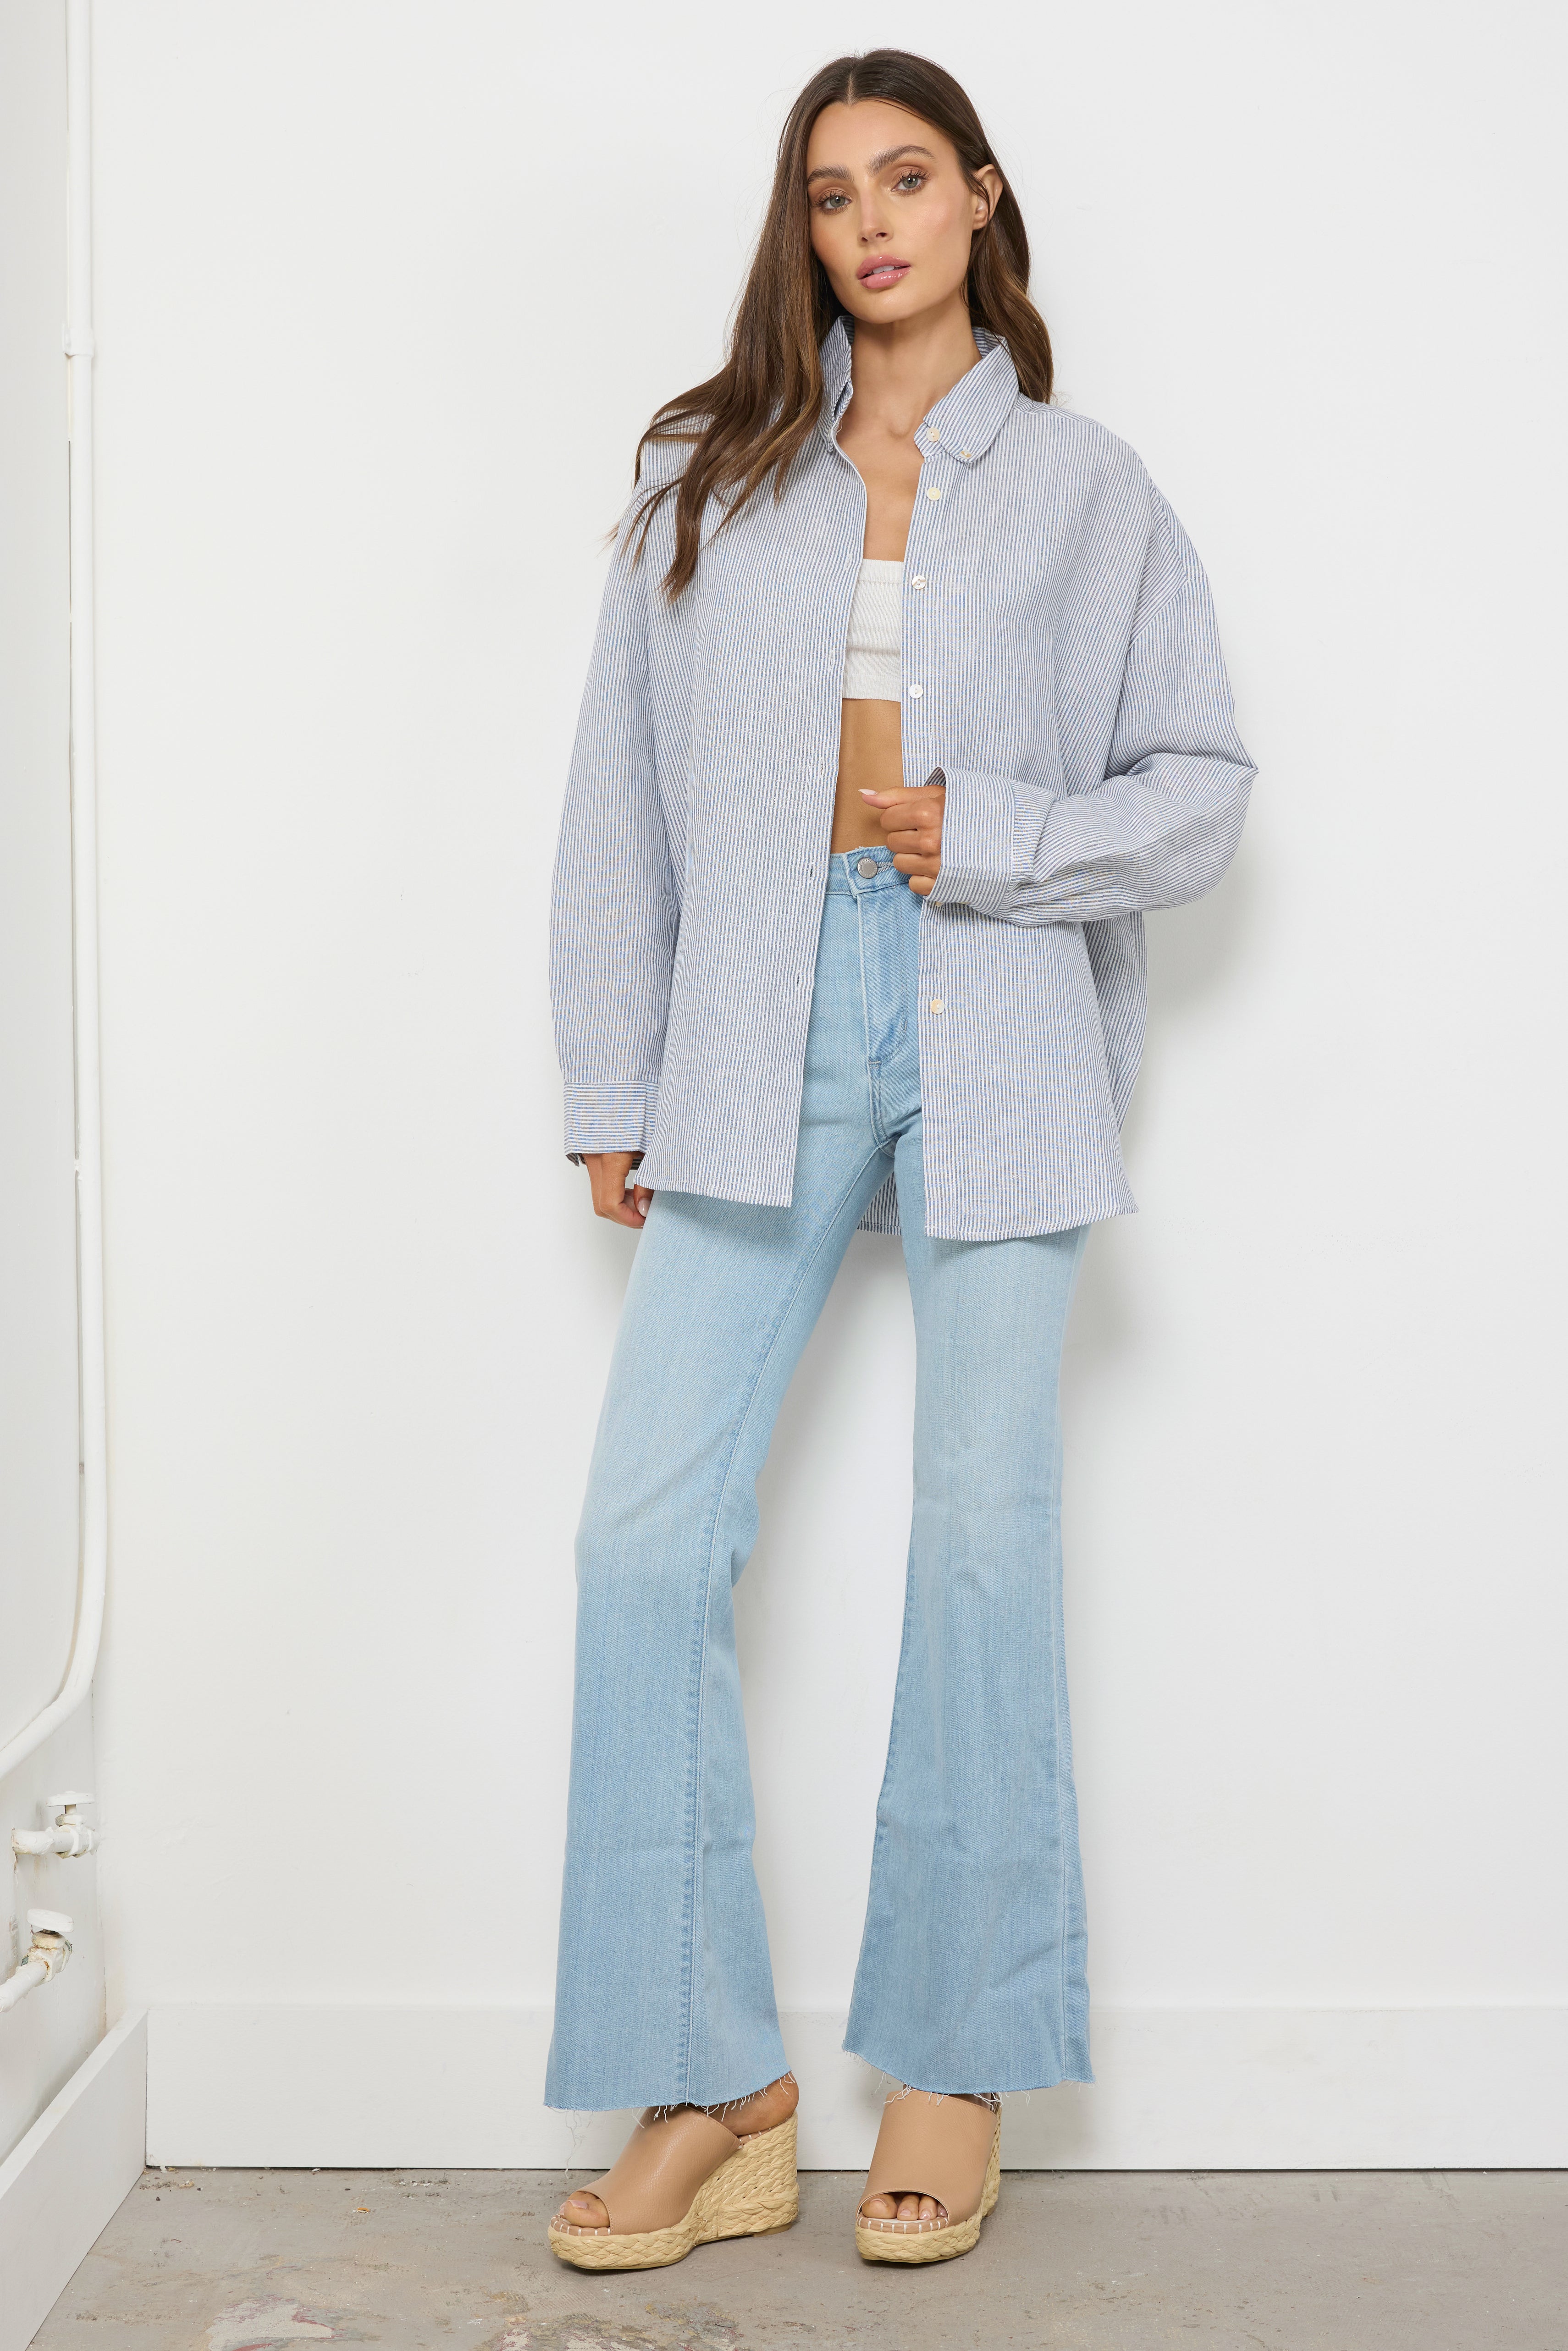 Summer By The Sea Chambray Blue Top